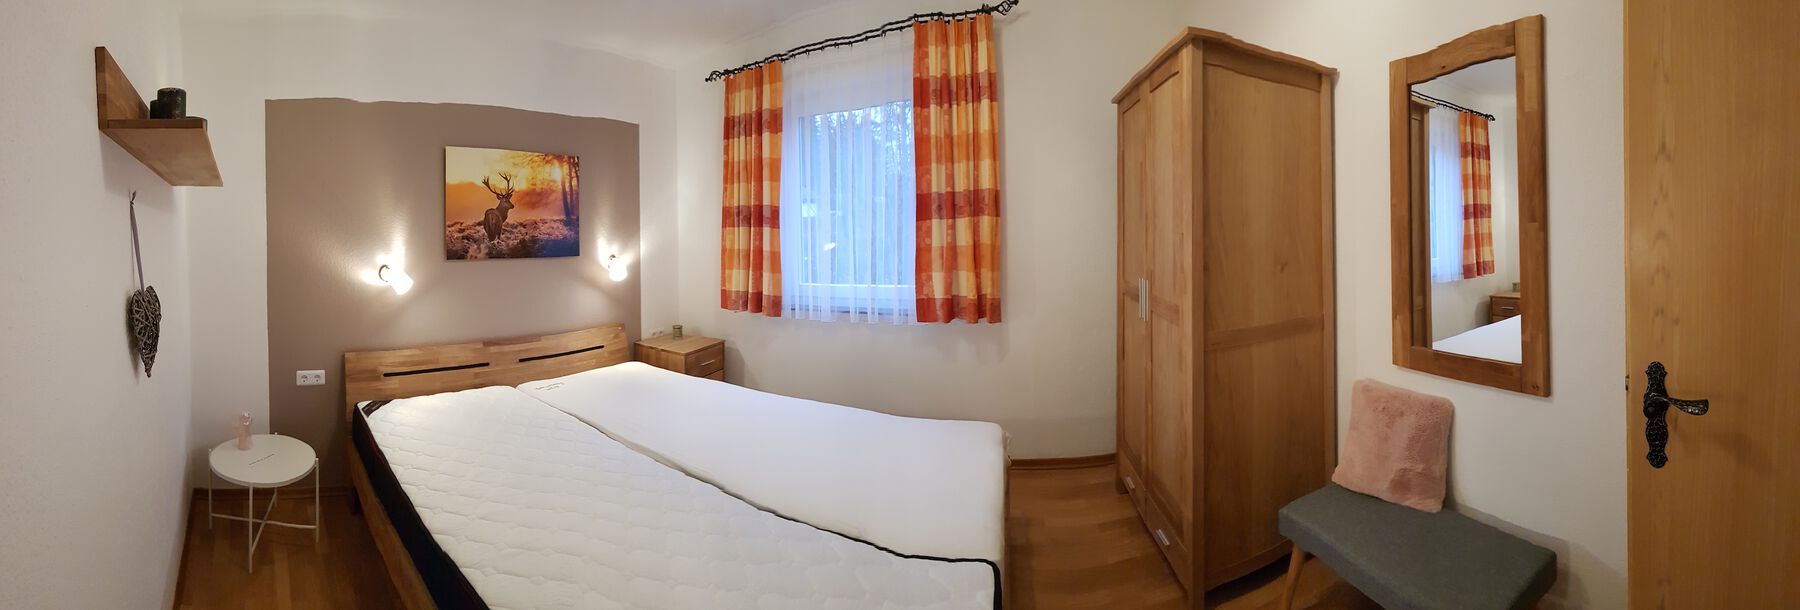 Schlafzimmer Panorama: